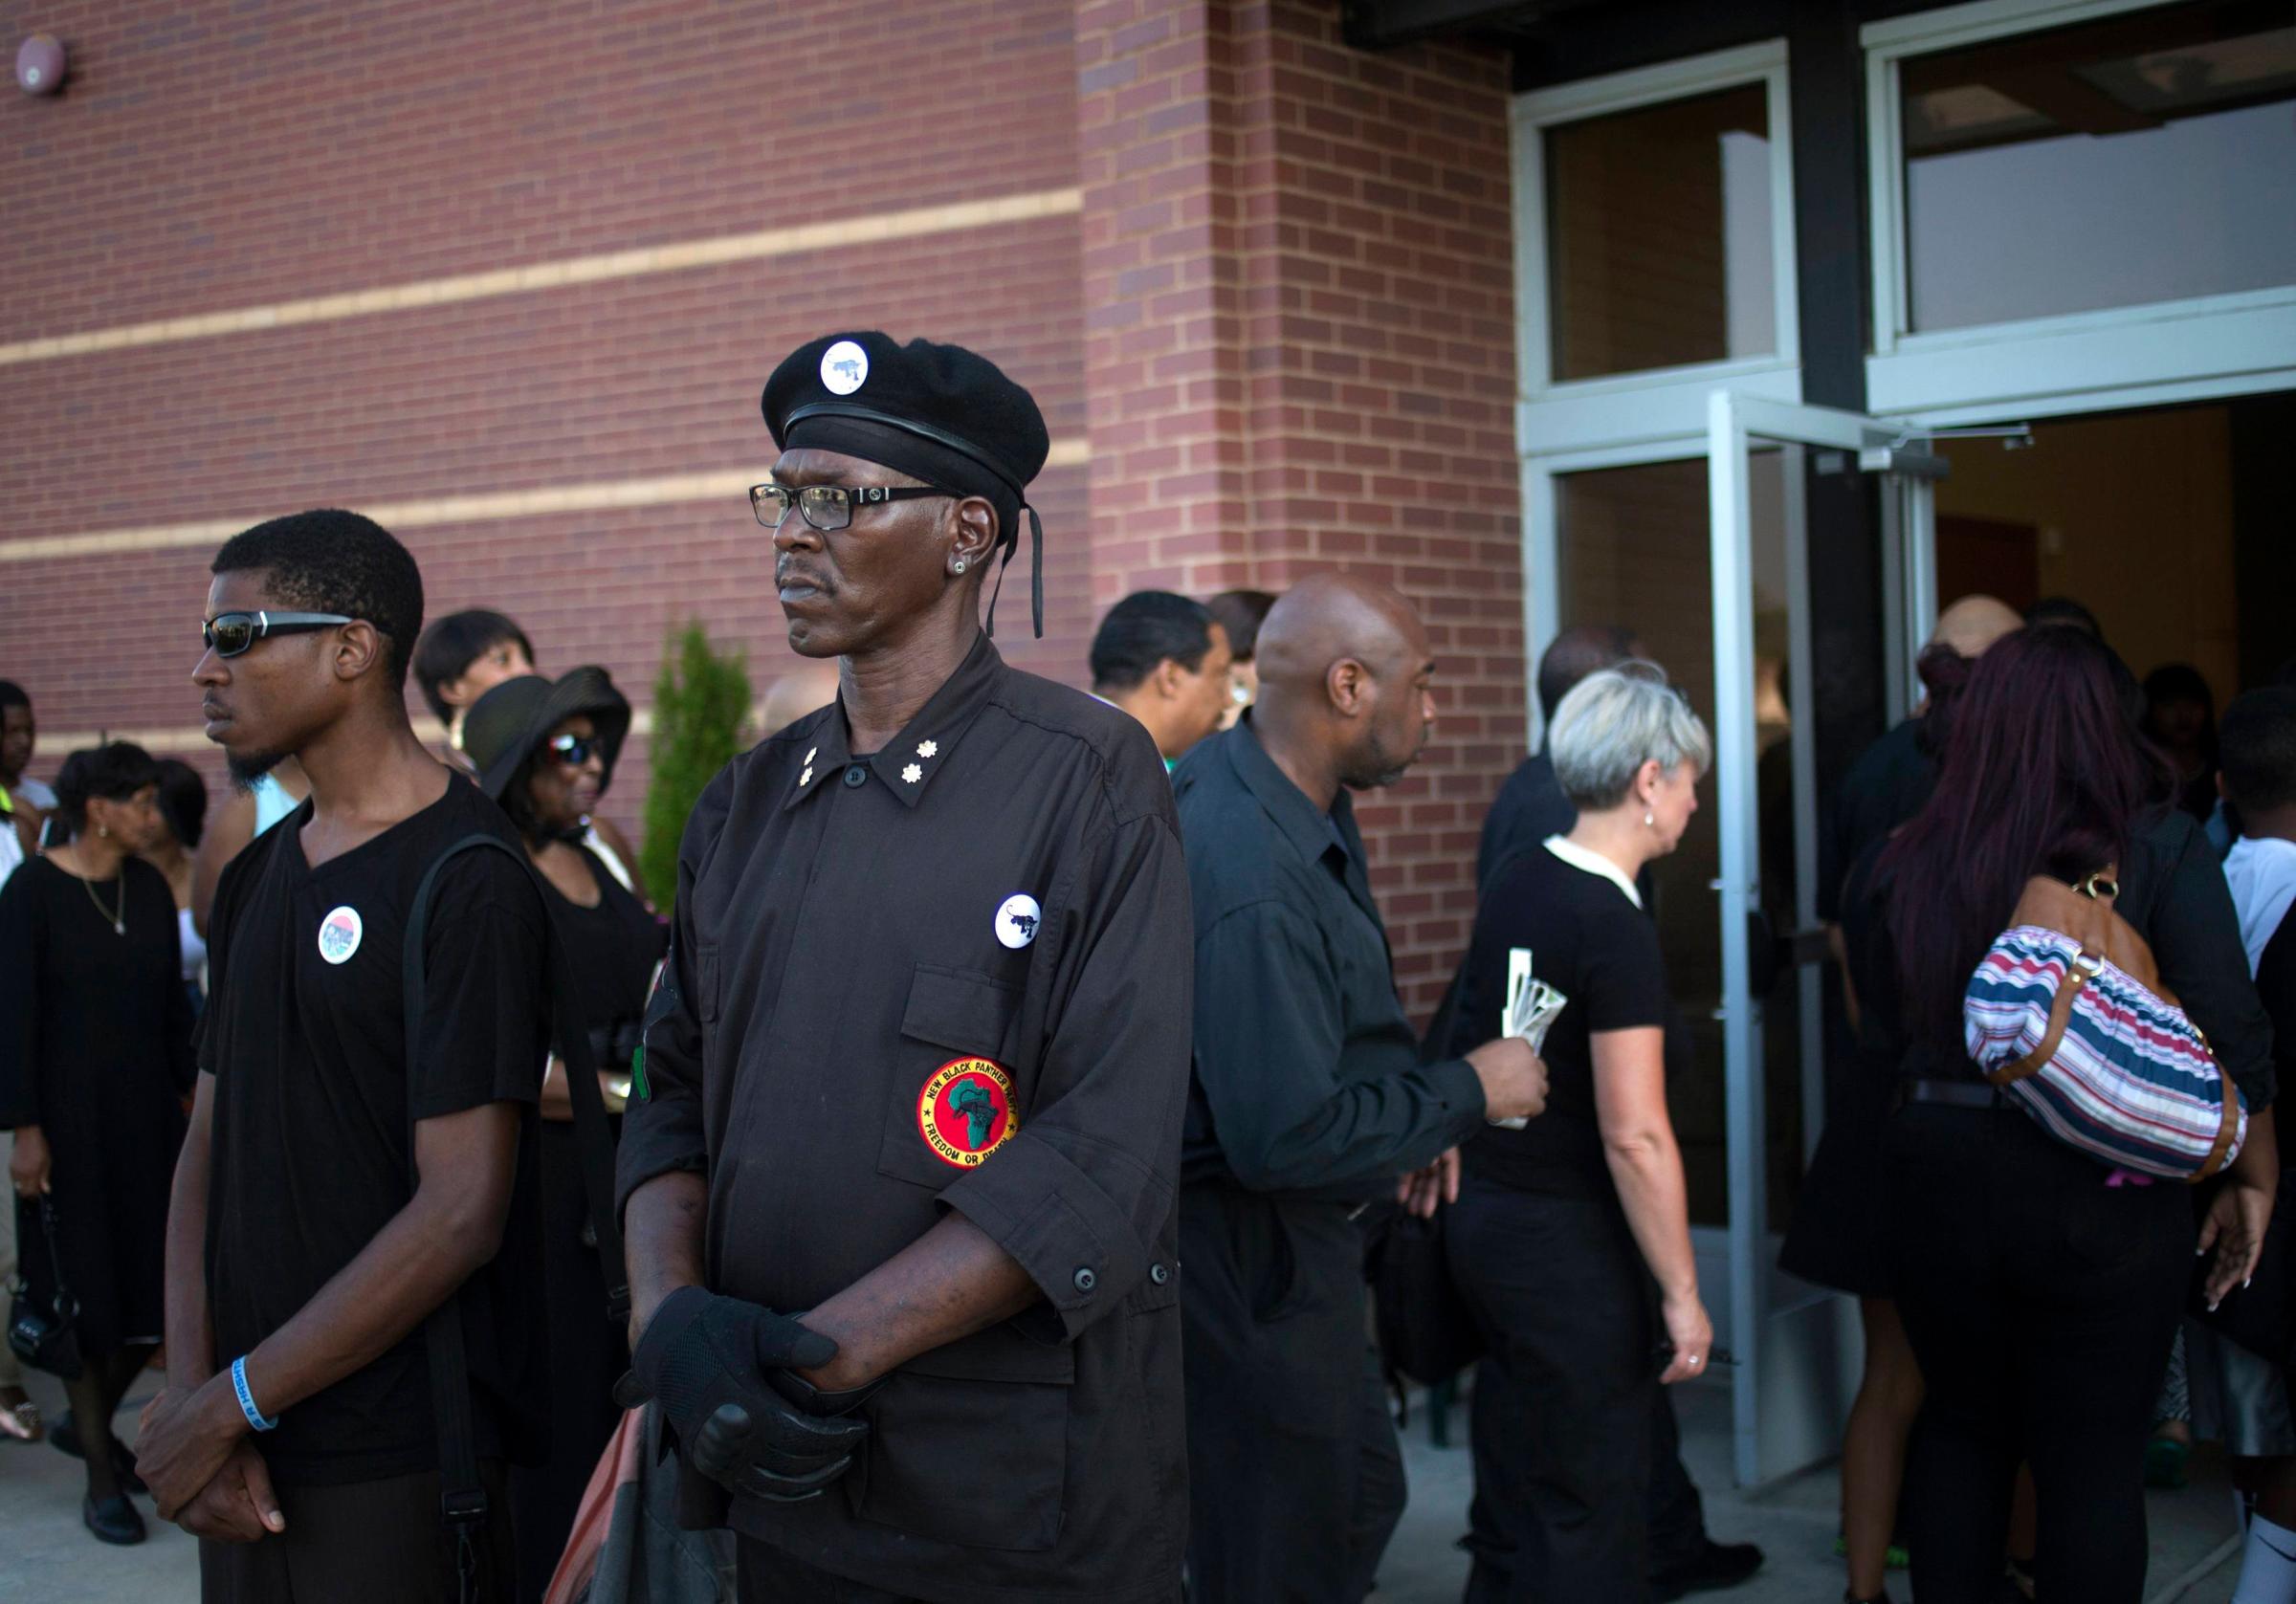 Members of the New Black Panther Party for Self-Defense (NBPP) stand guard in front of Friendly Temple Missionary Baptist Church ahead of  funeral services for 18-year-old Michael Brown in St. Louis, Missouri